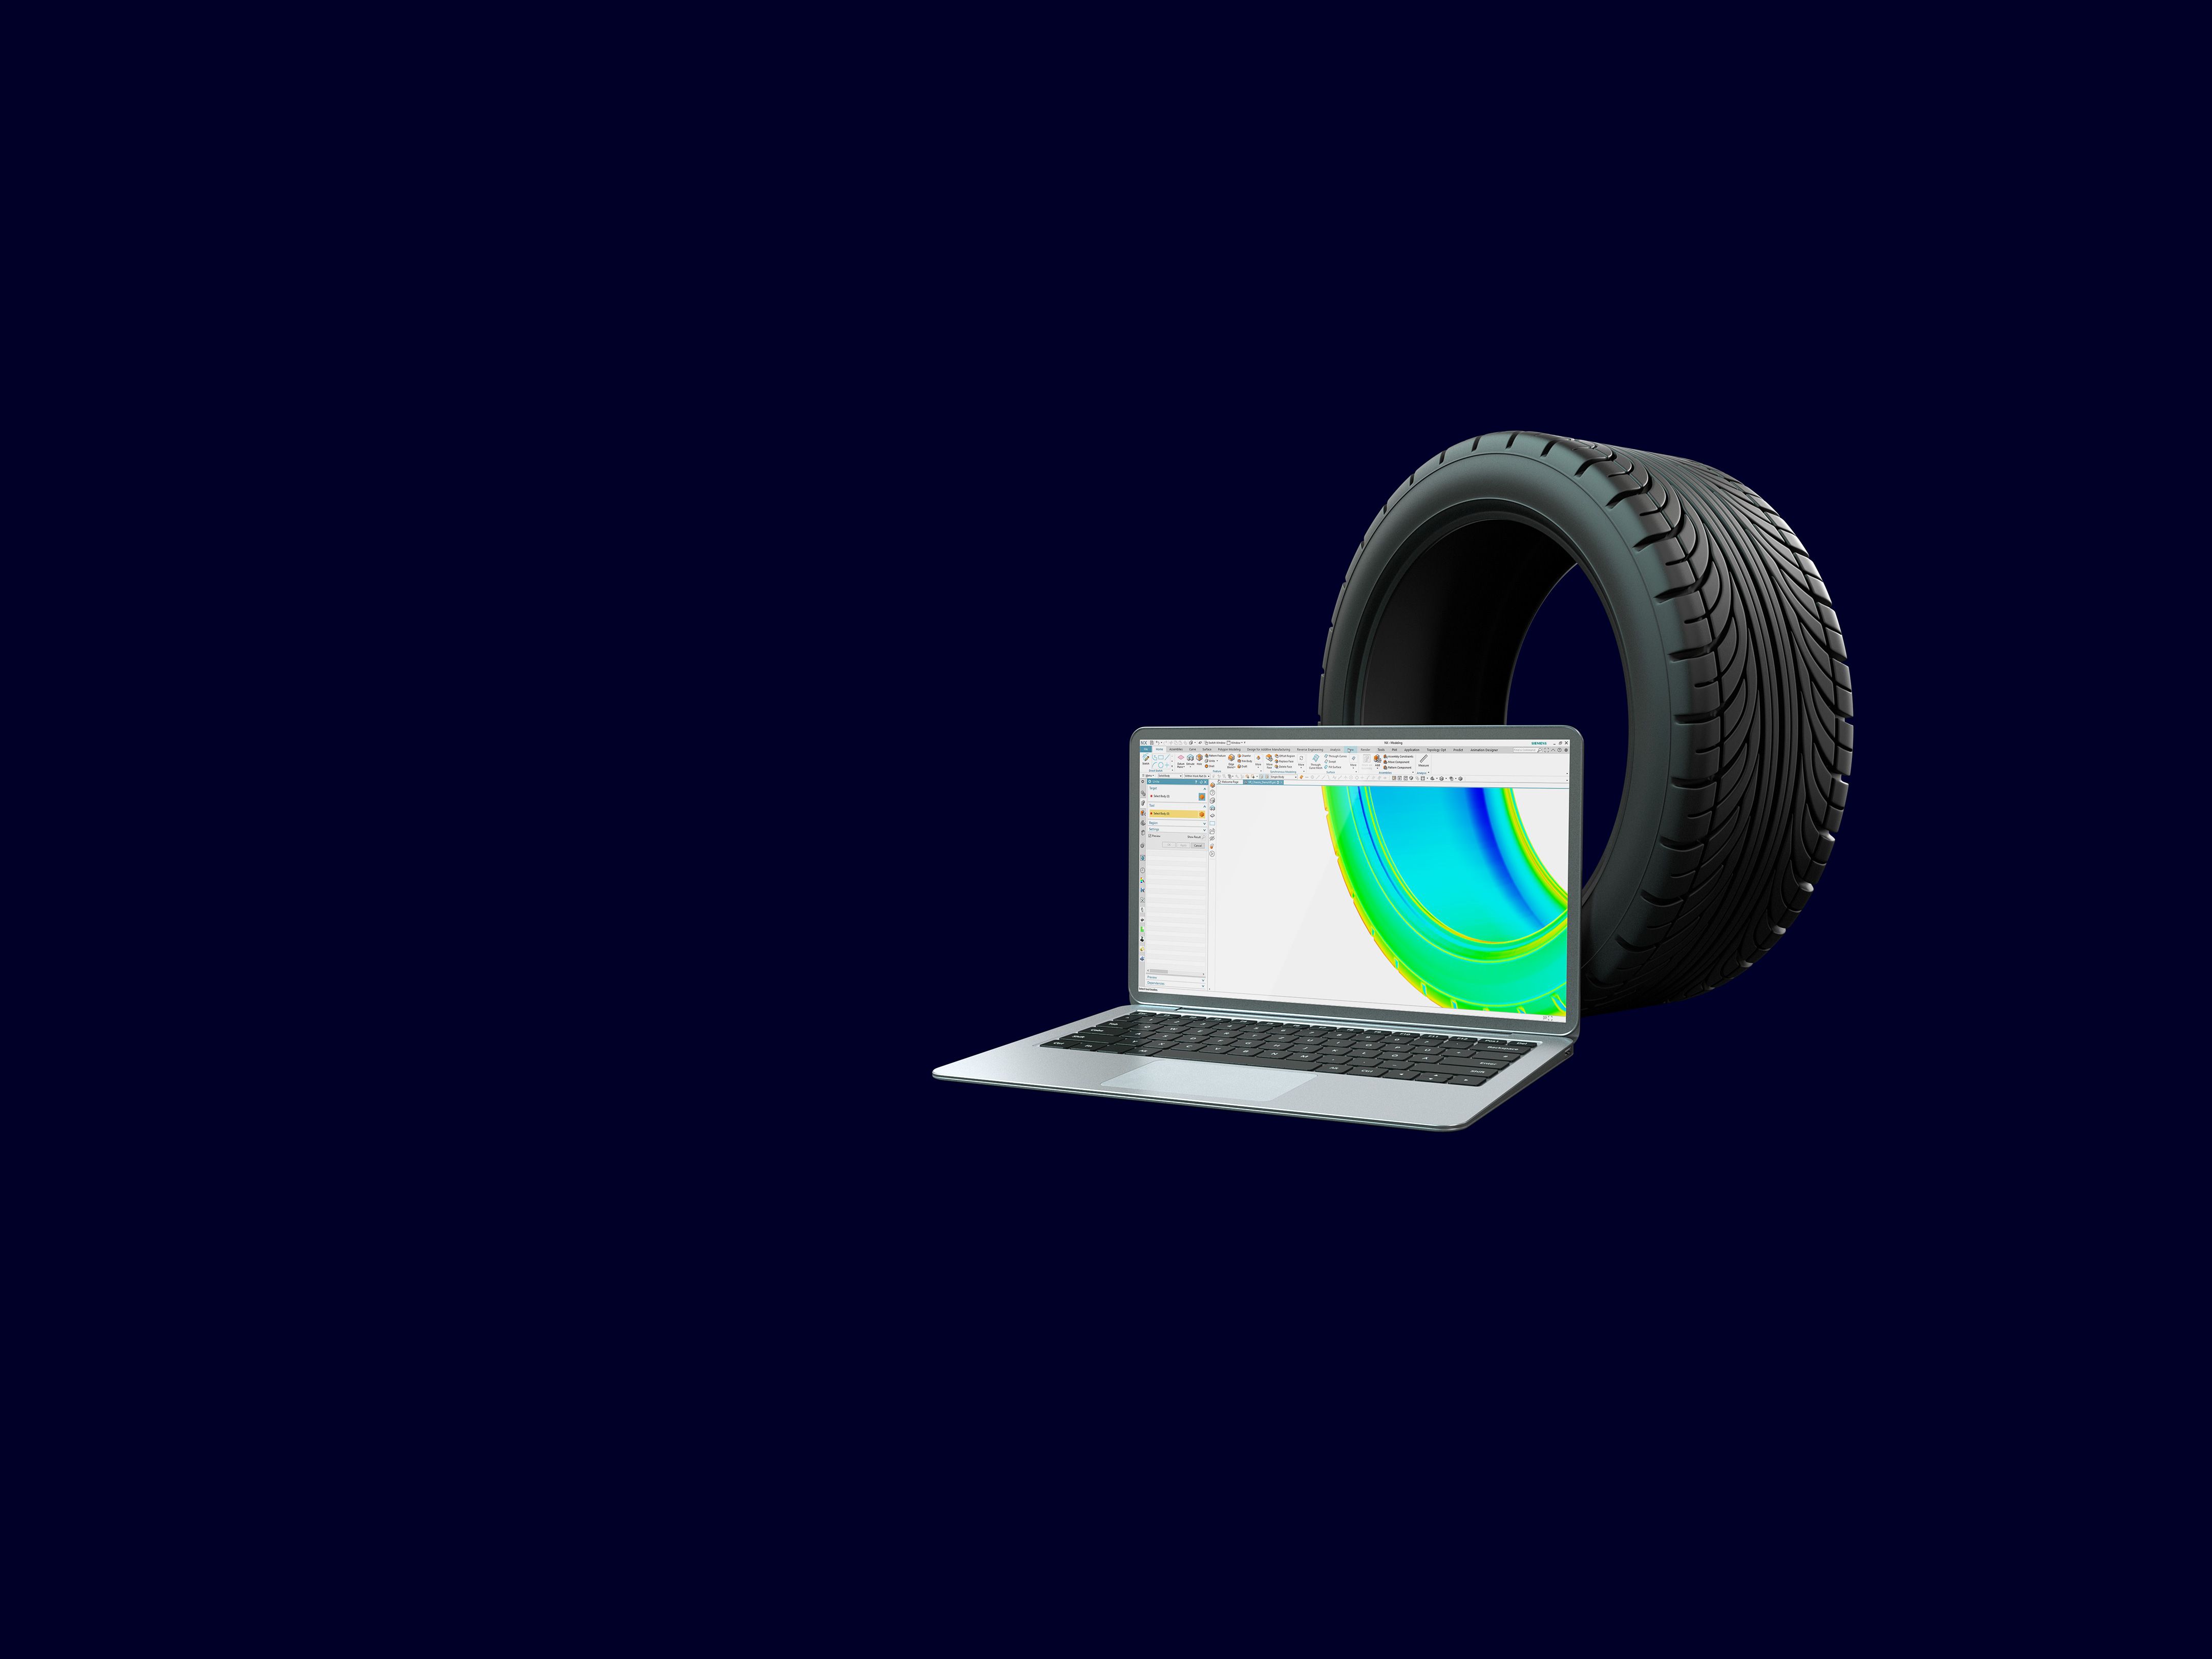 Video: Continental's driving simulator makes tire development more  sustainable